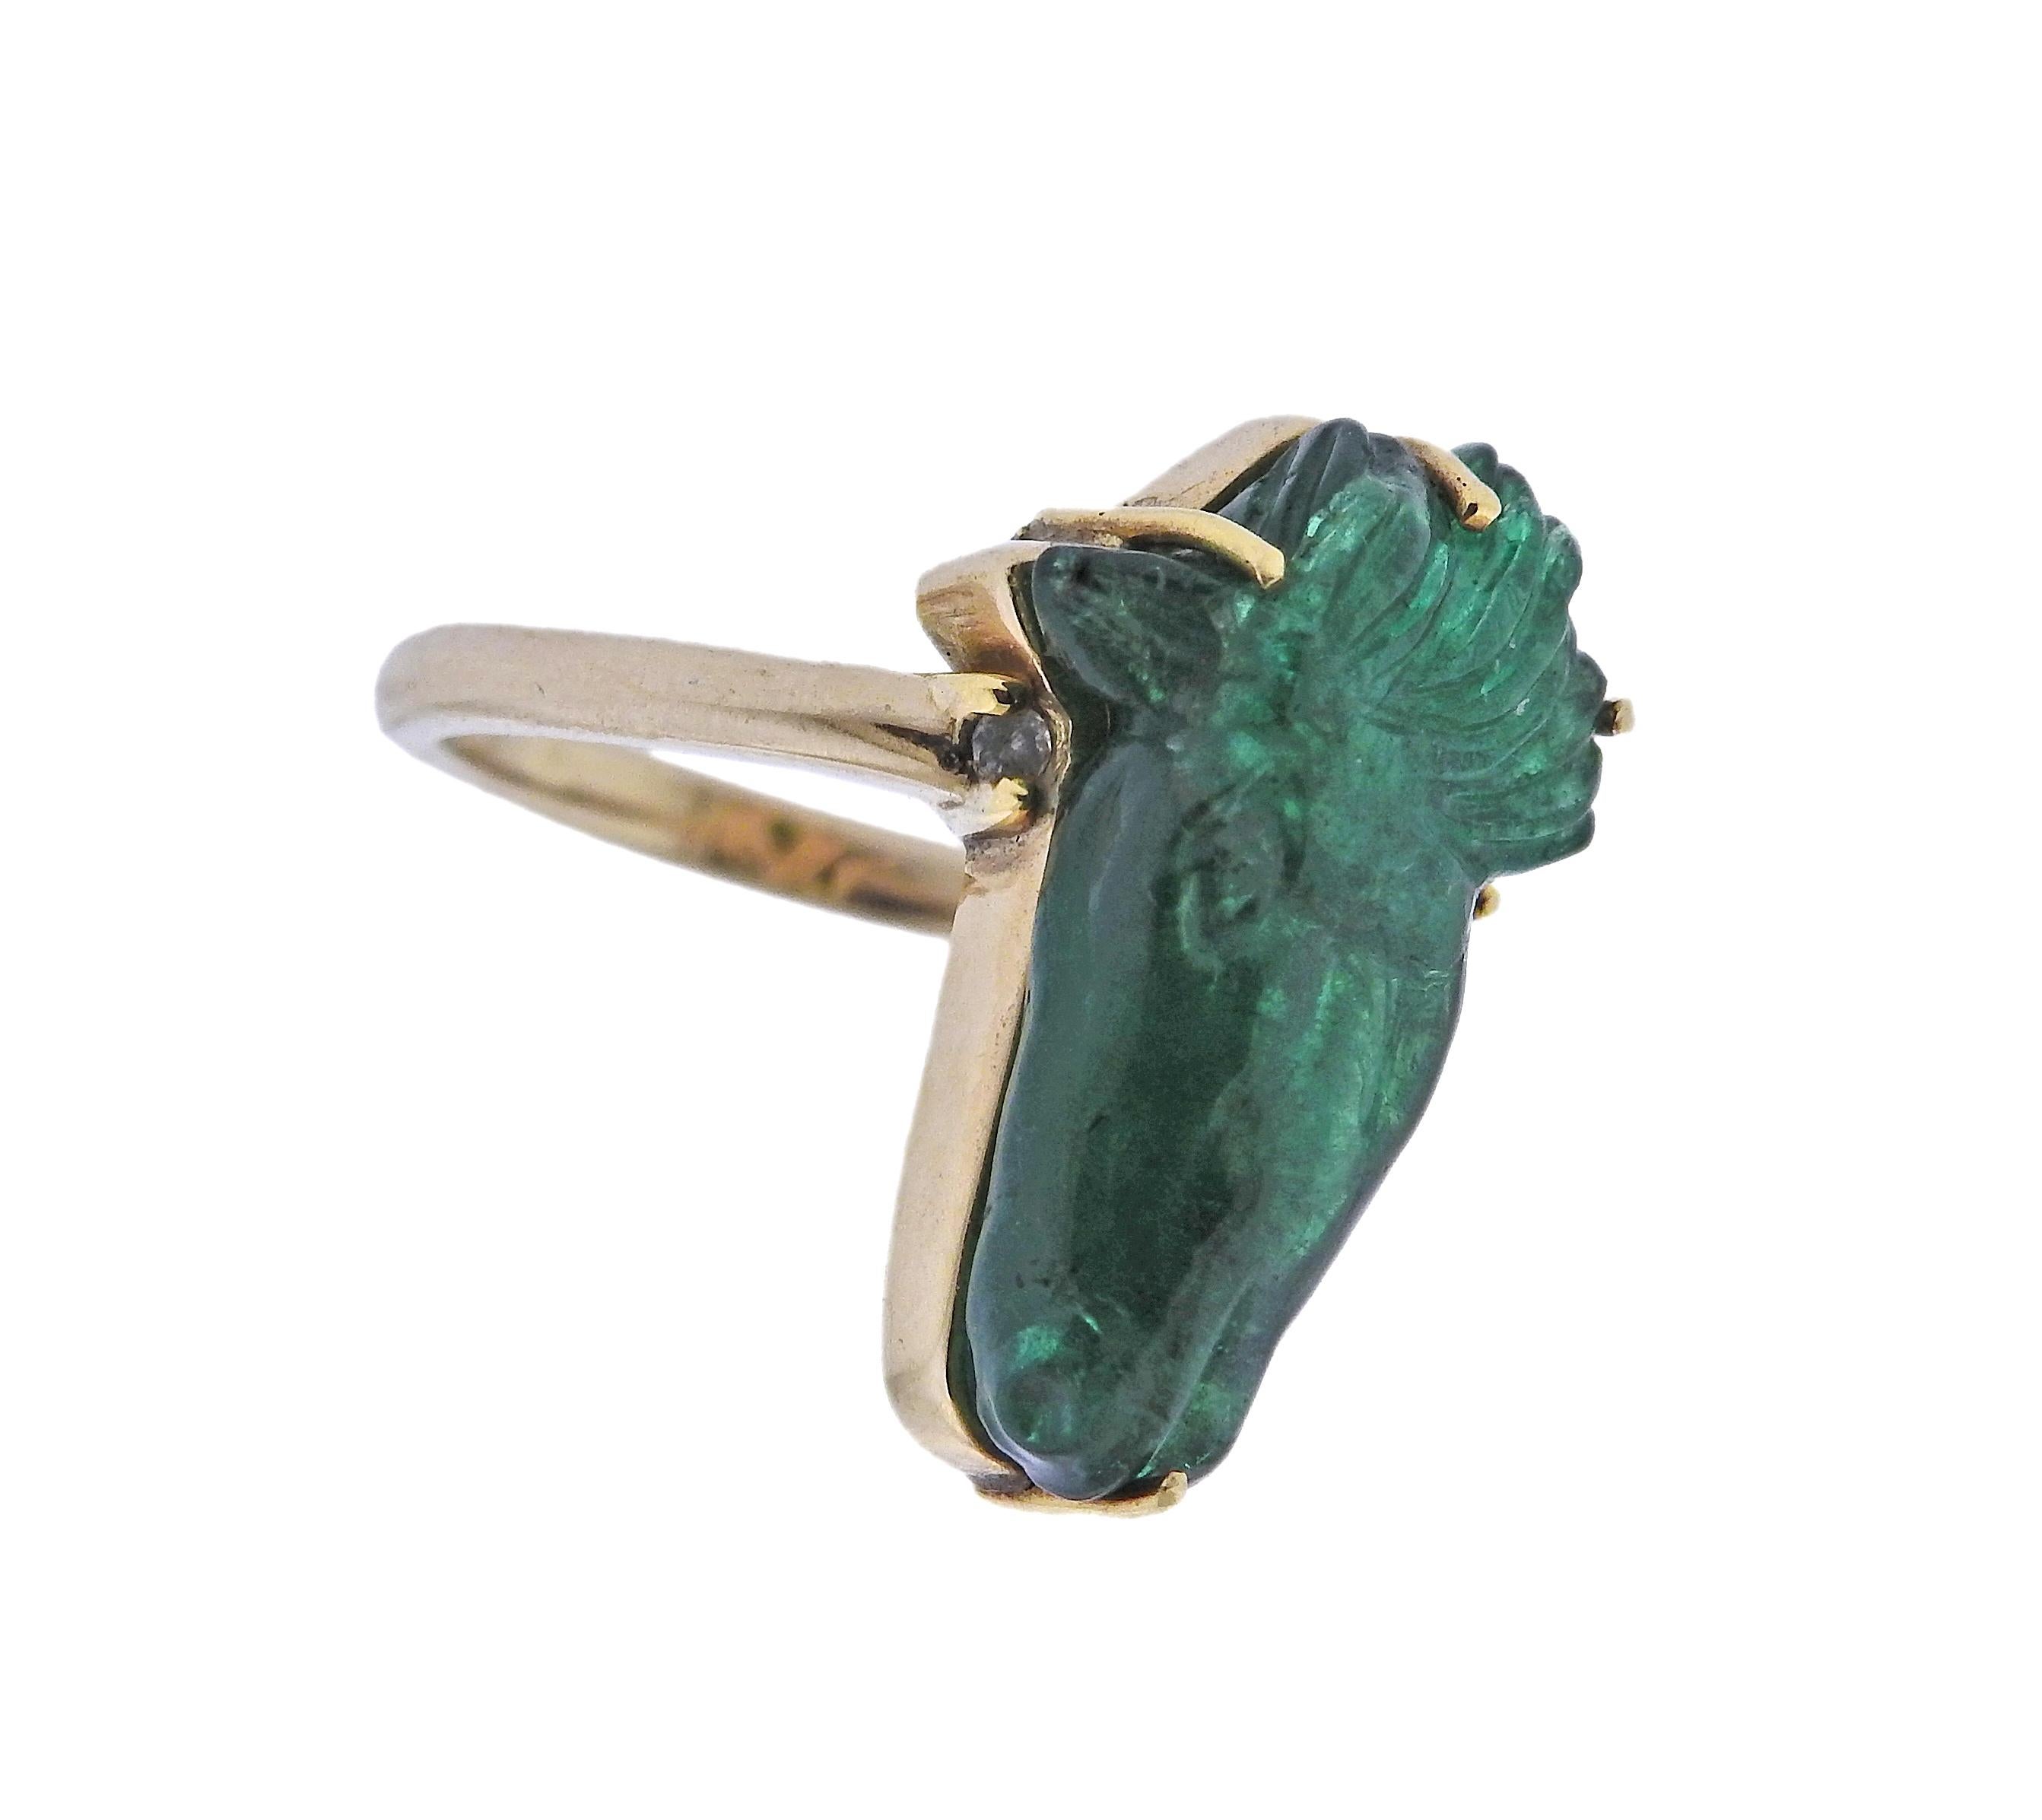 Unusual 18k gold ring, with carved 7.25ct emerald, depicting a horse head, set with 2 diamonds (0.03ctw). Ring size - 6.25, top of the ring (horse head0 is 21mm x 14mm. Marked: k18, 0.03, 7.25. Weight - 5.6 grams.